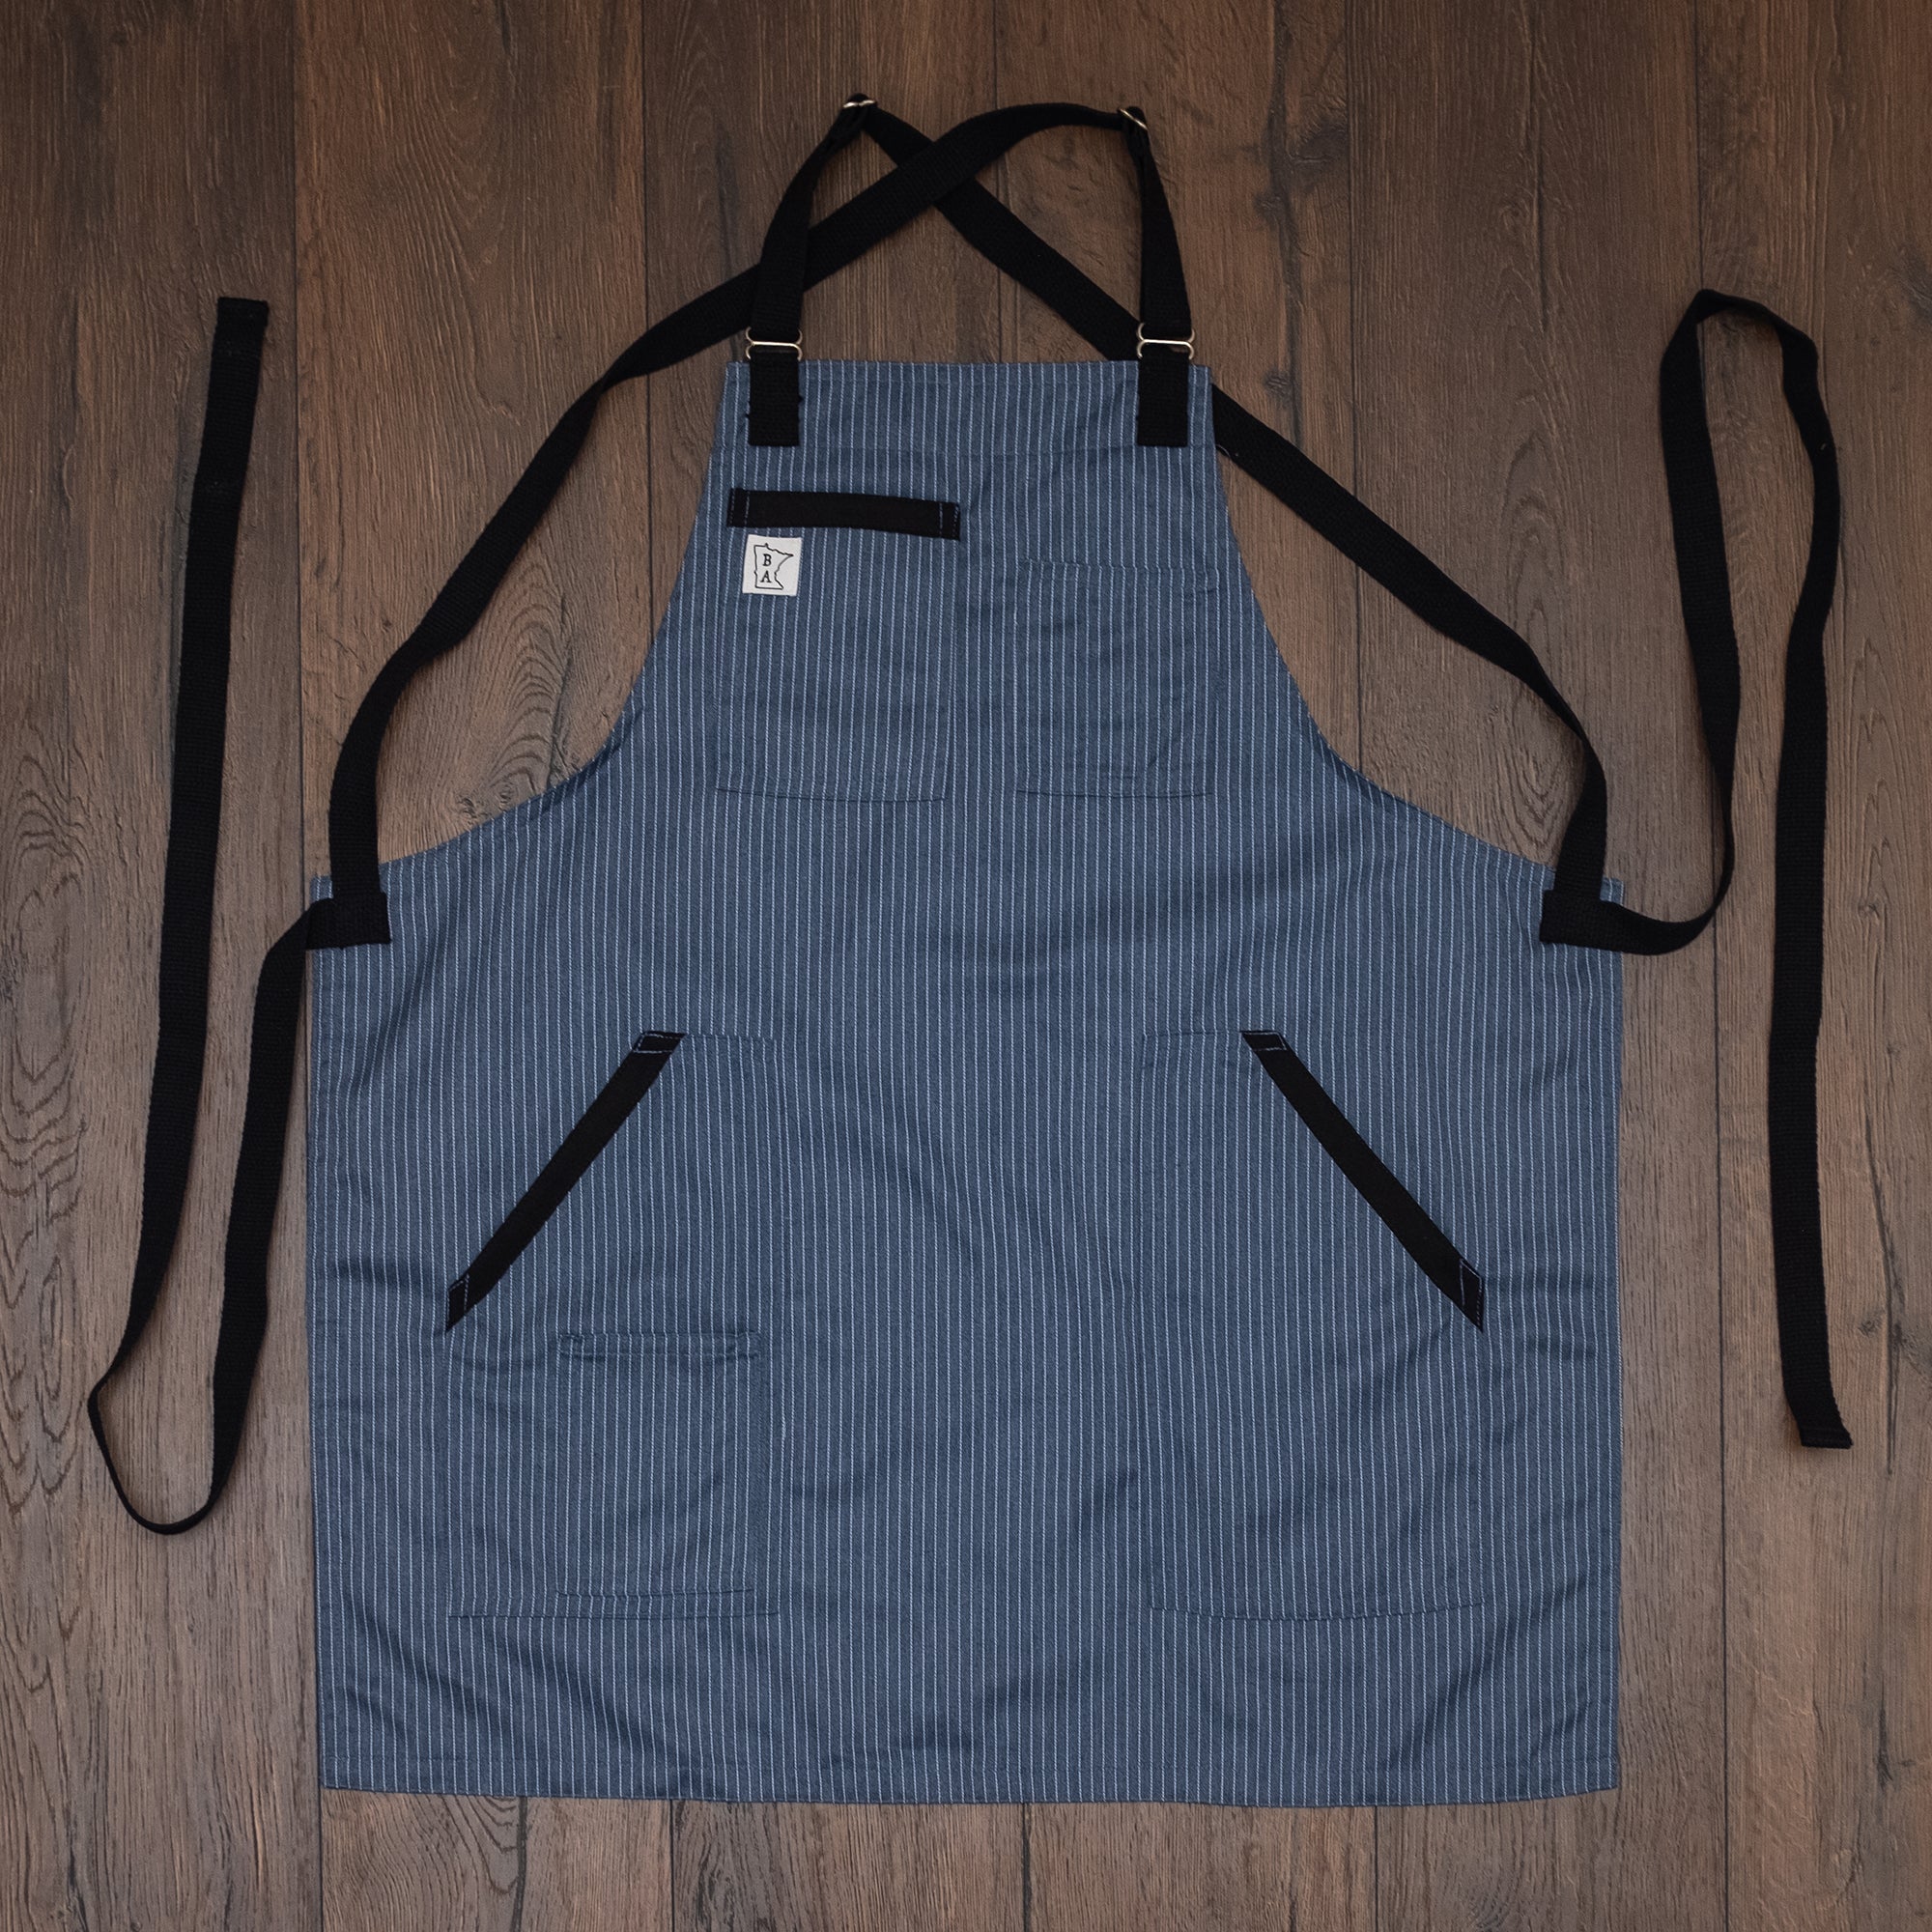 The poly/cotton twill apron design Culinary Gangster with black accents on the pockets and black strapping laid out flat on a wooden surface. Produced by Craftmade Aprons, based in Minnesota.